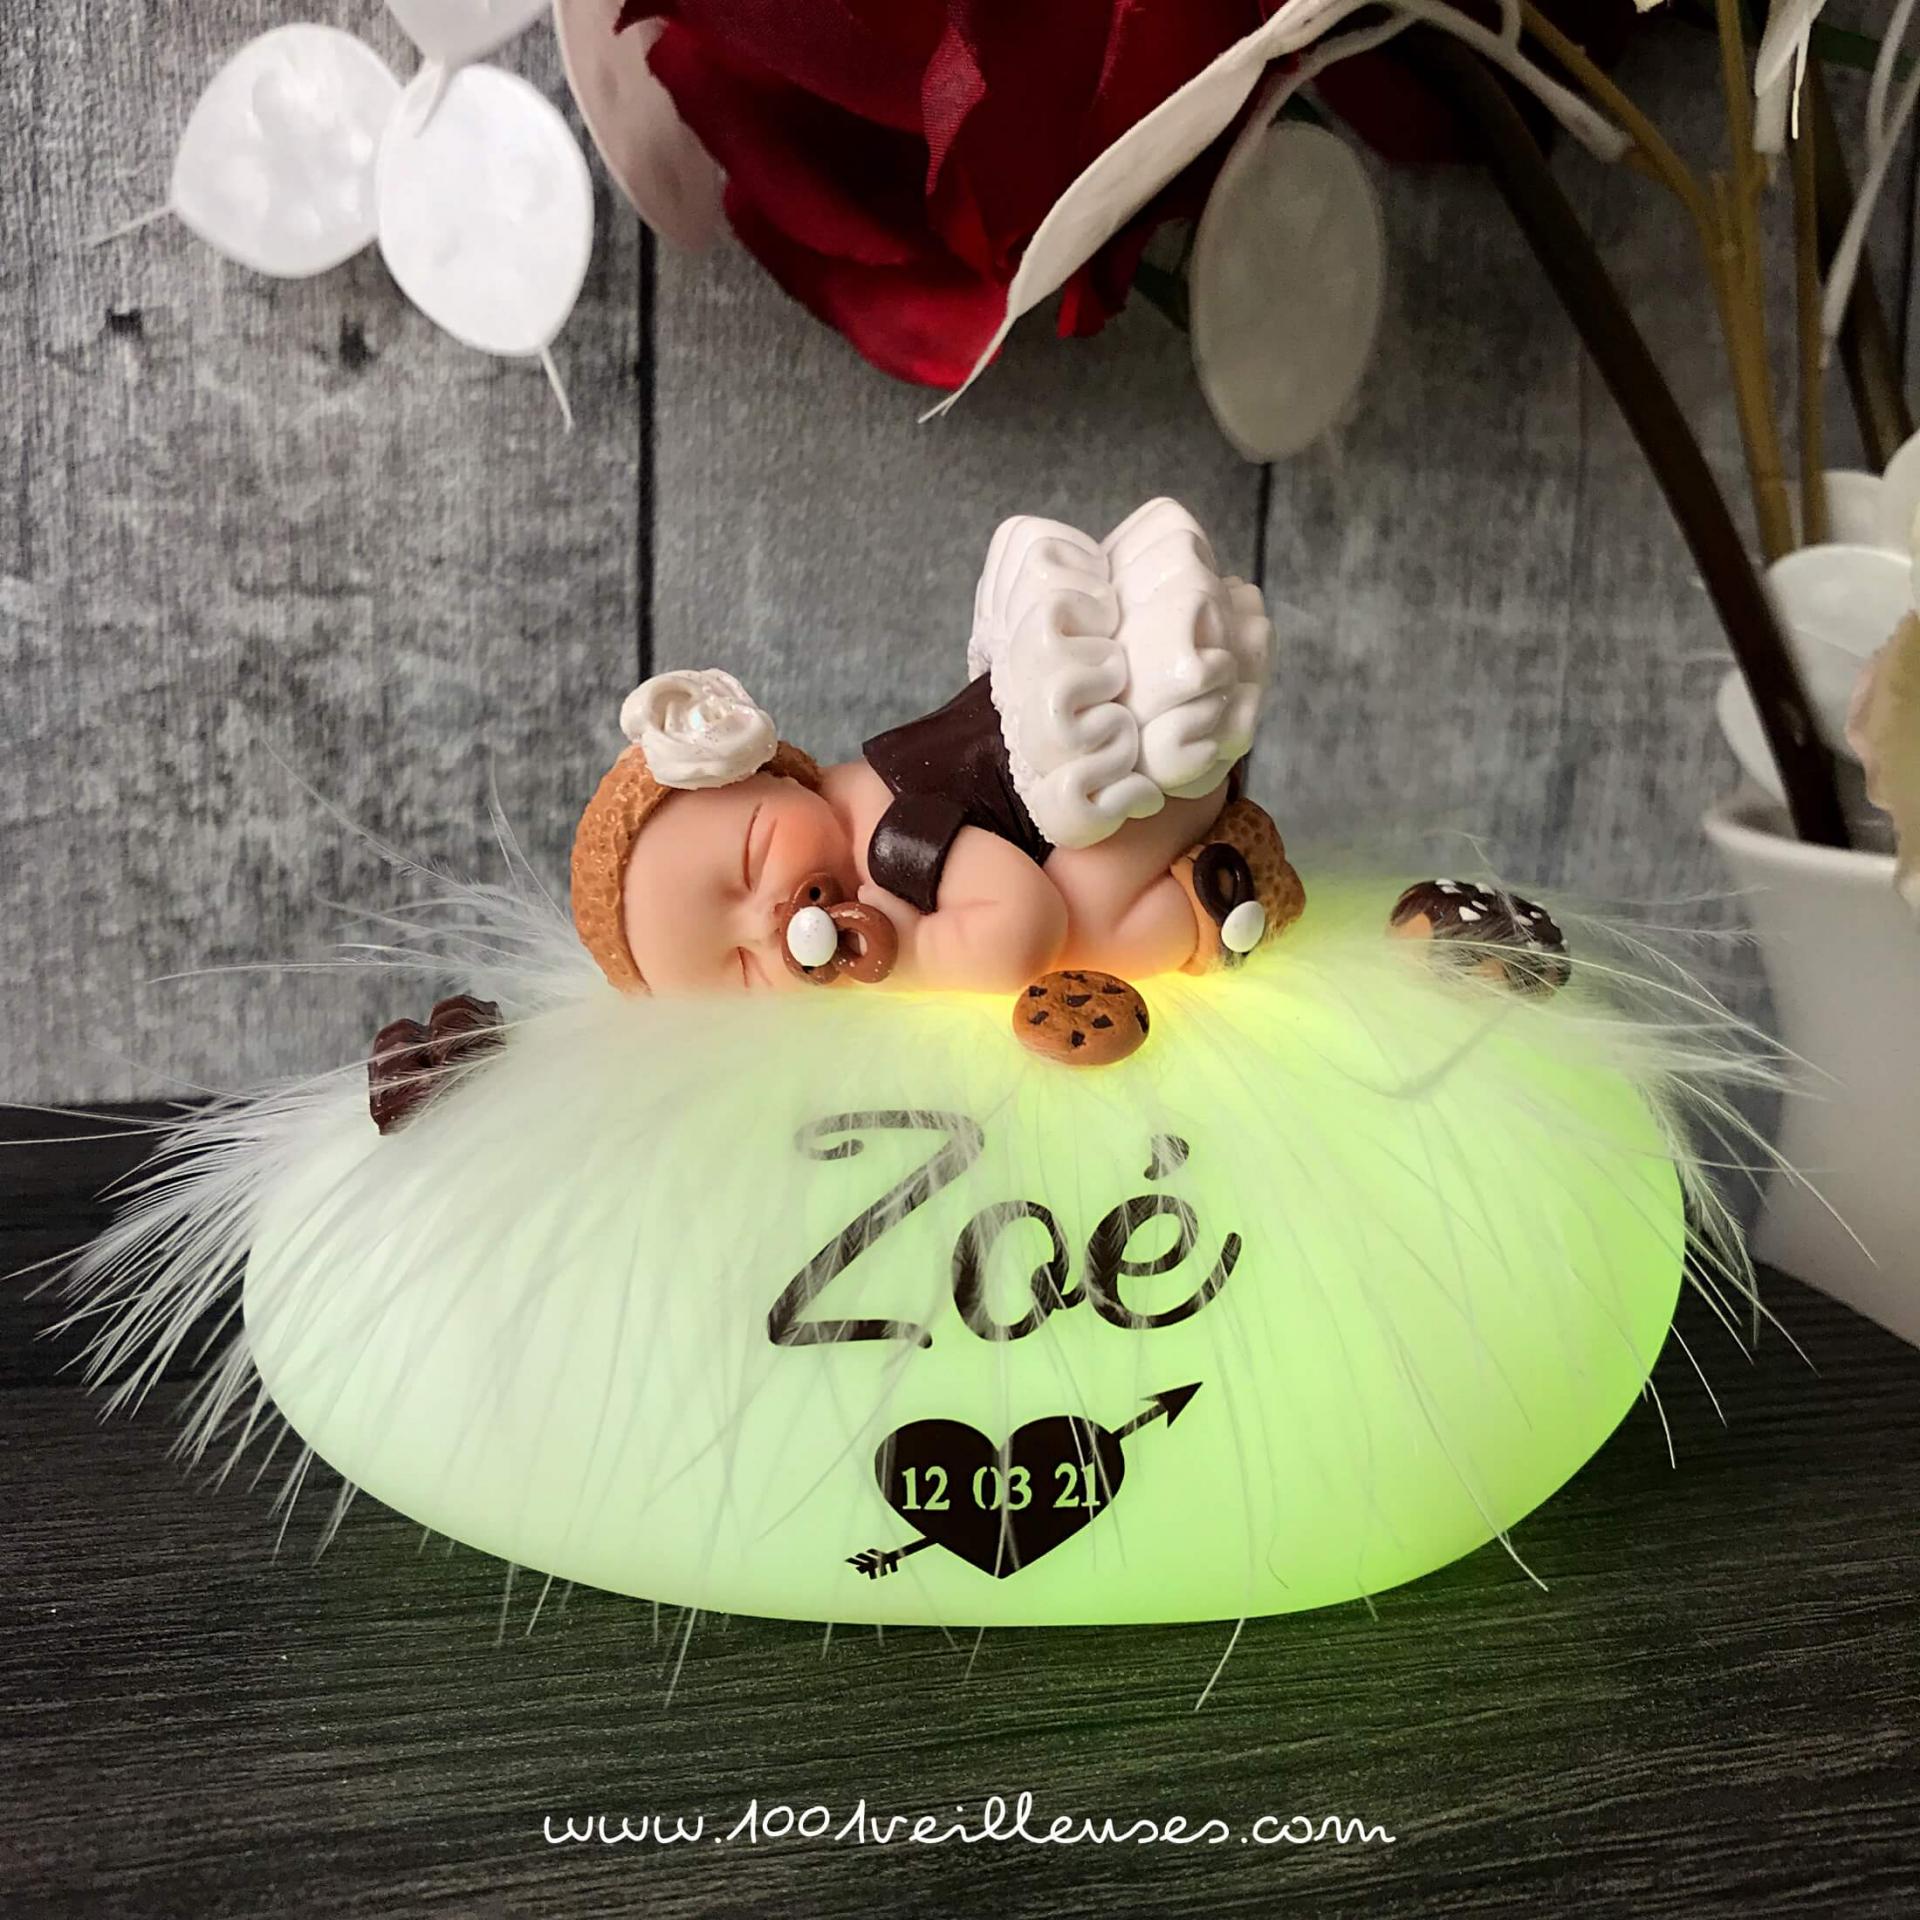 Beautiful handmade creation for baby: personalized night light for a girl with her stuffed animal and her name, birth box included